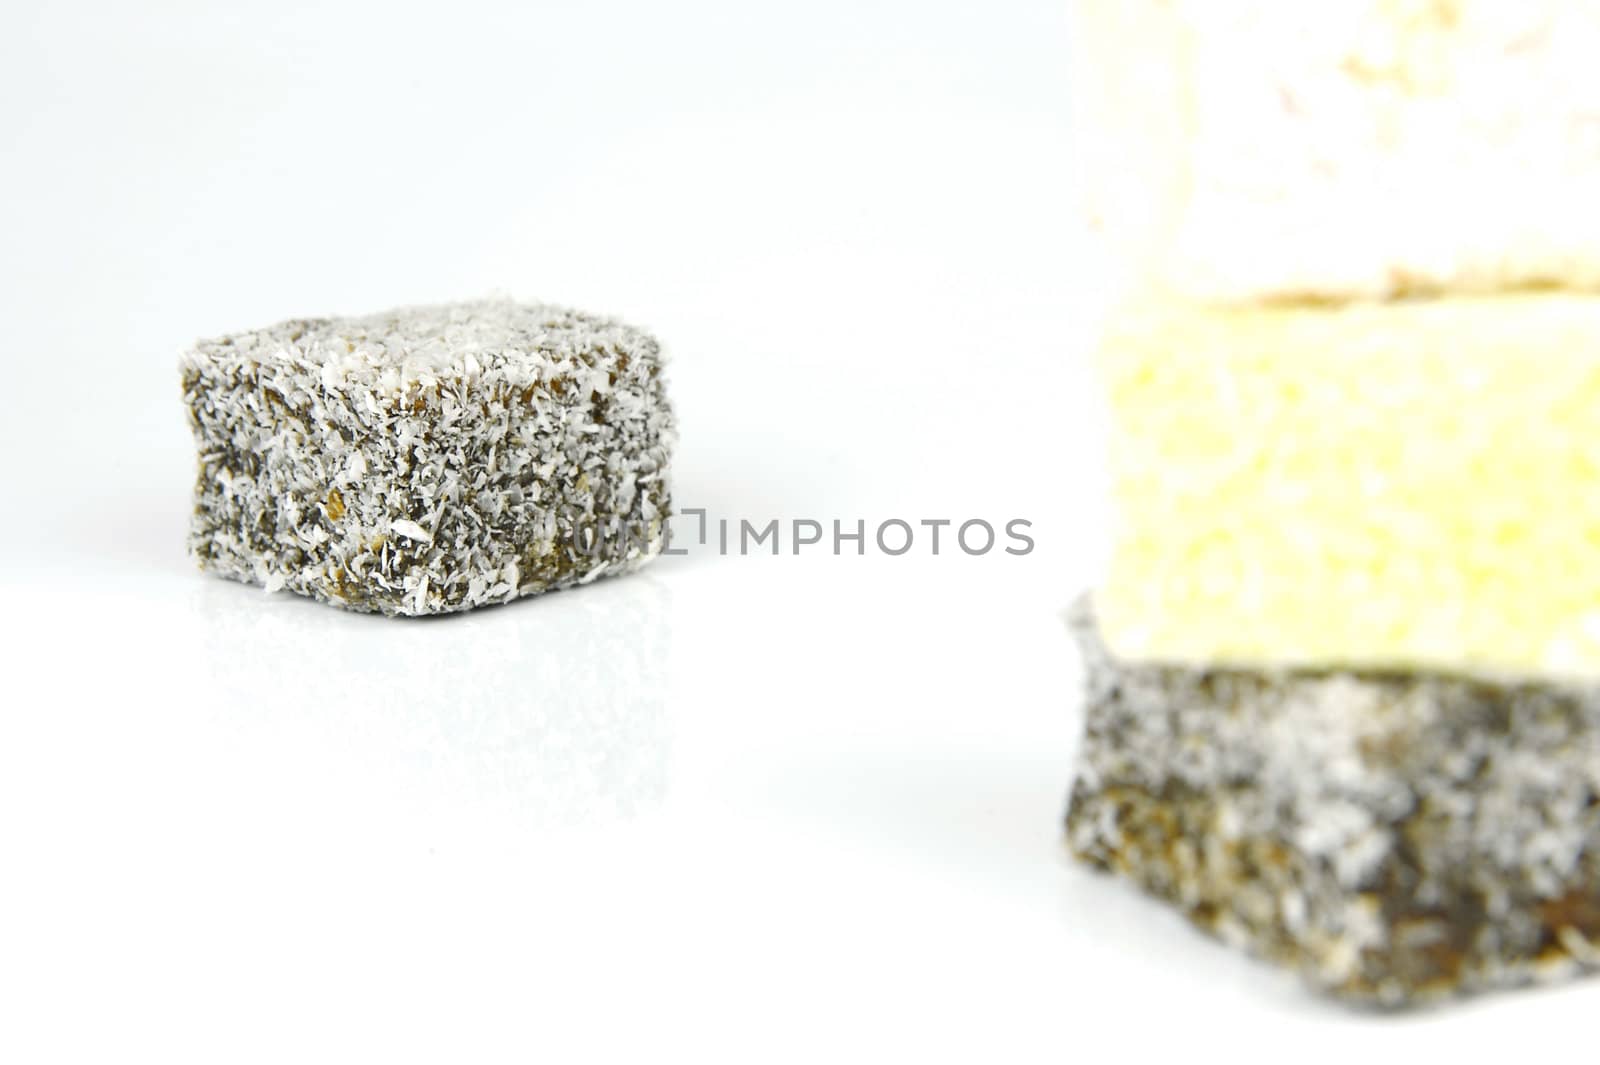 Lamingtons by Kitch